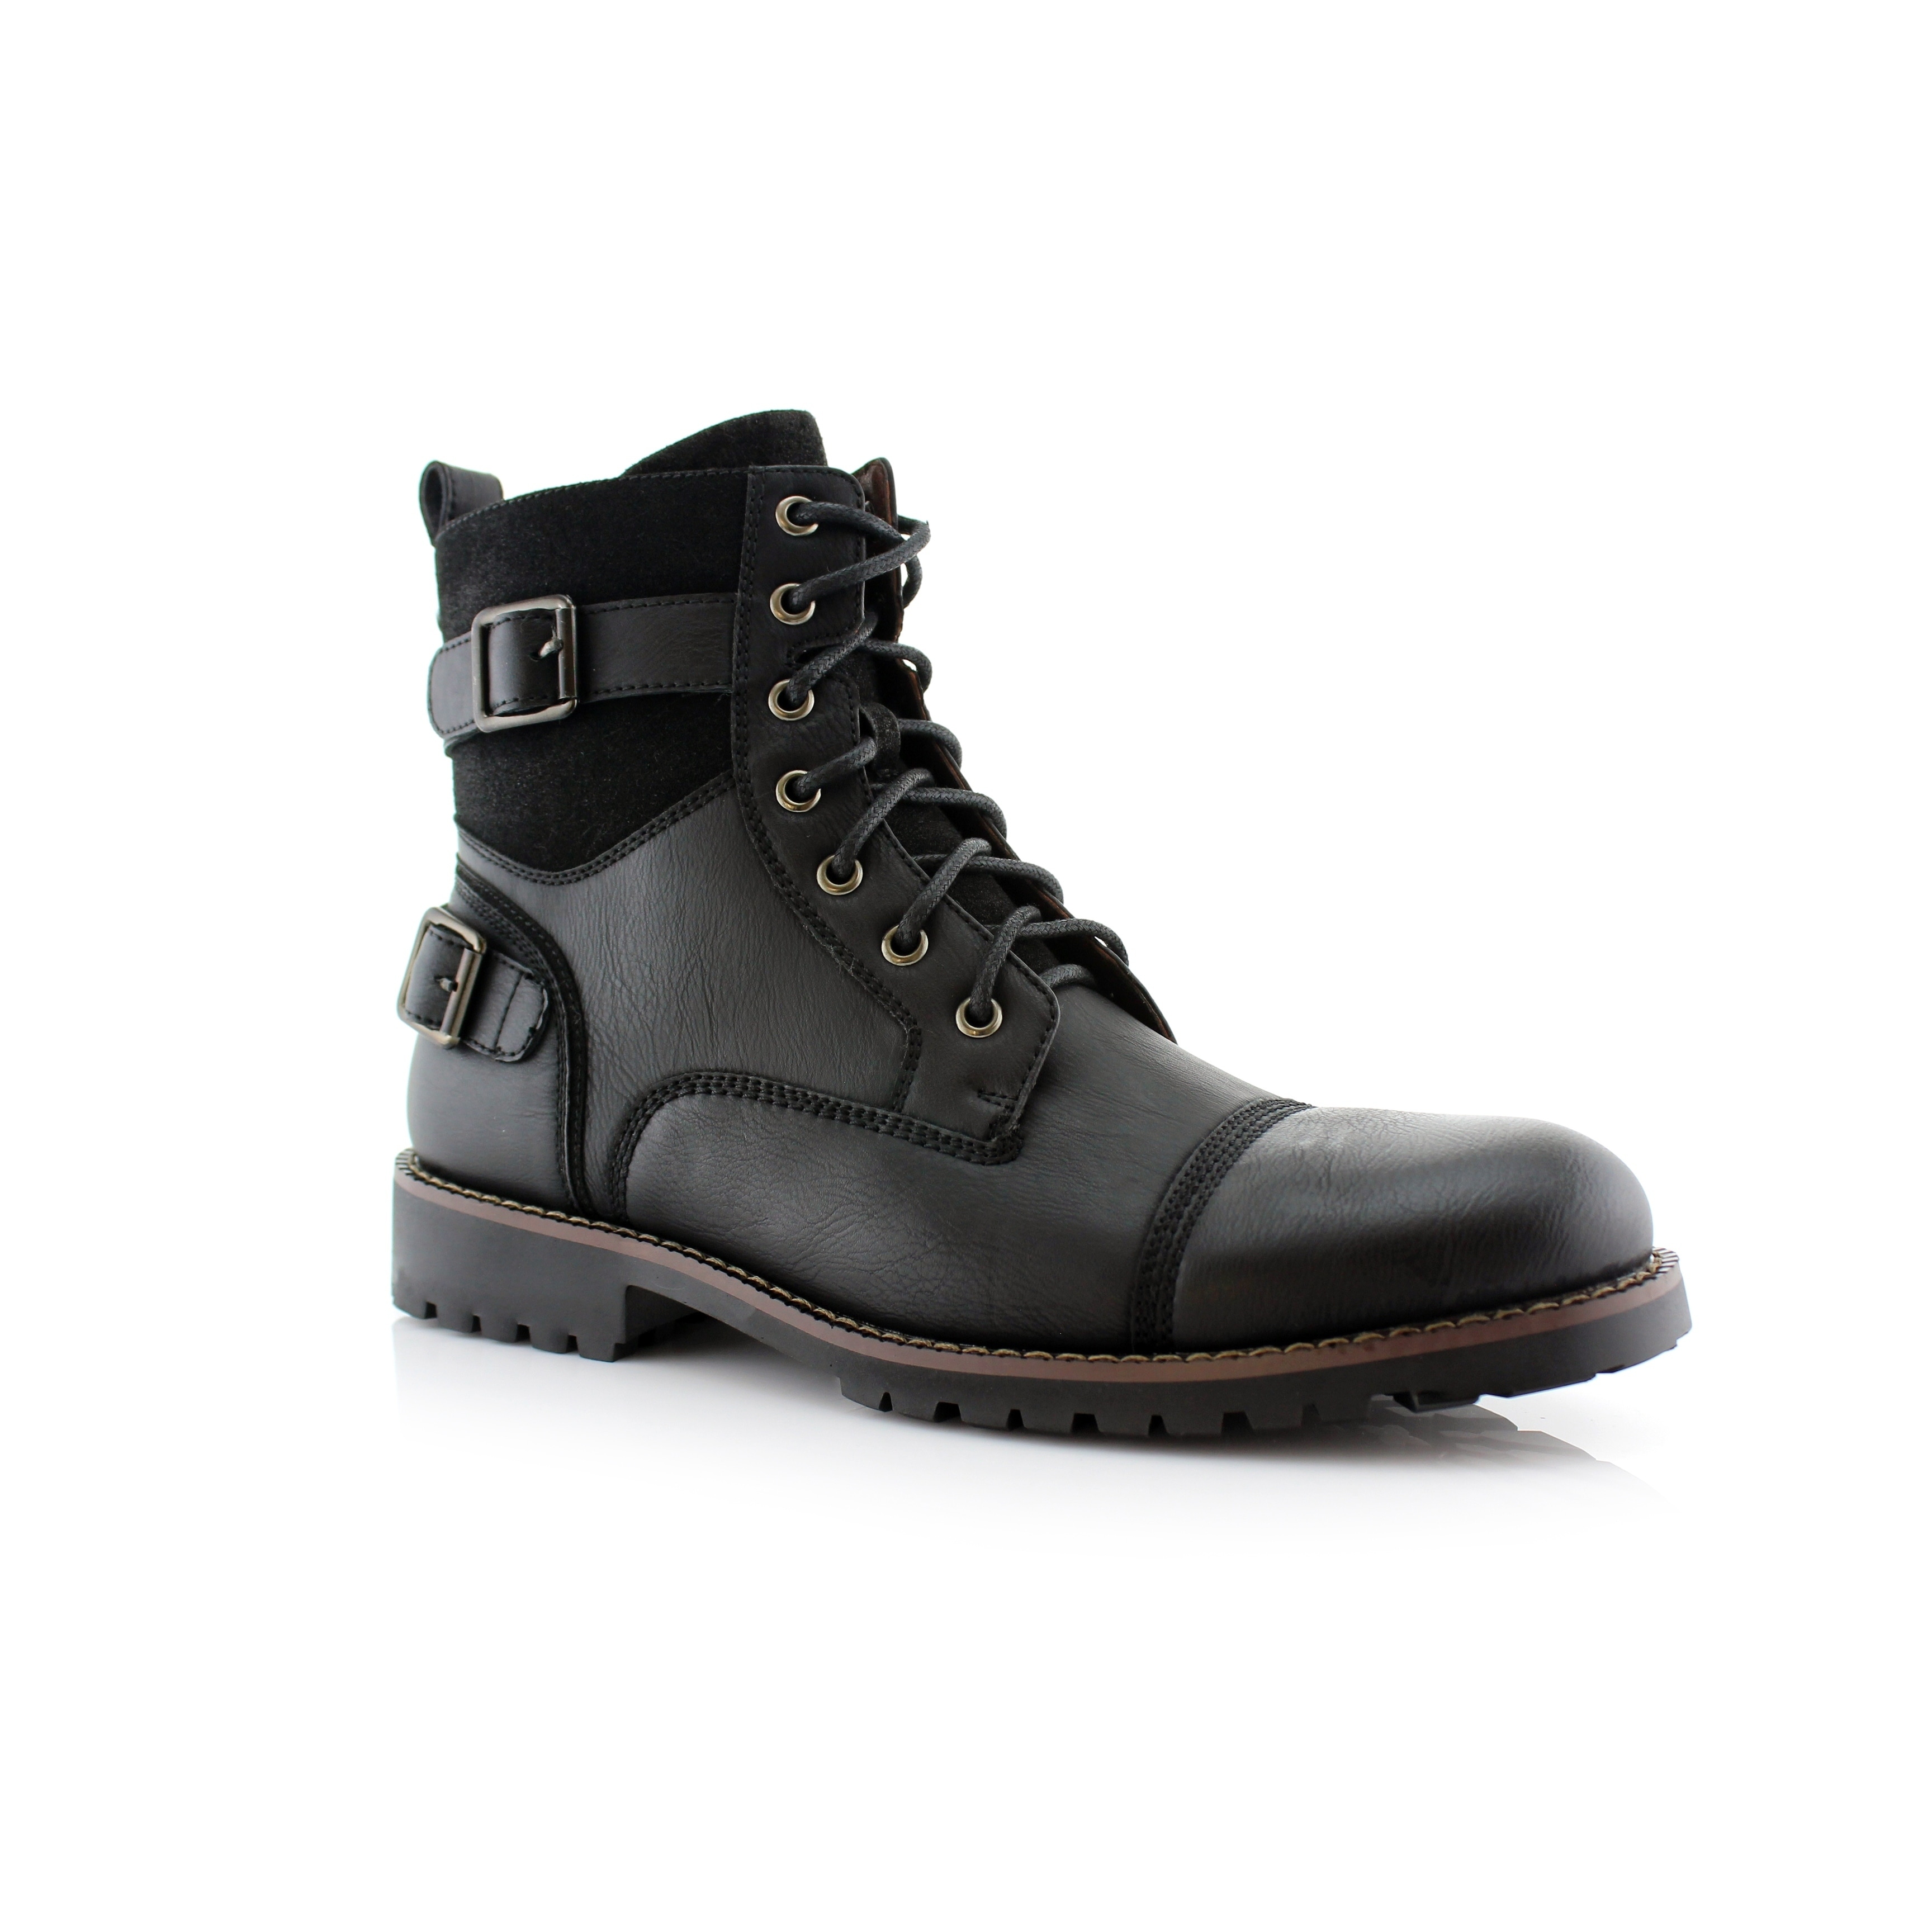 Combat Boots For Work or Casual Wear 